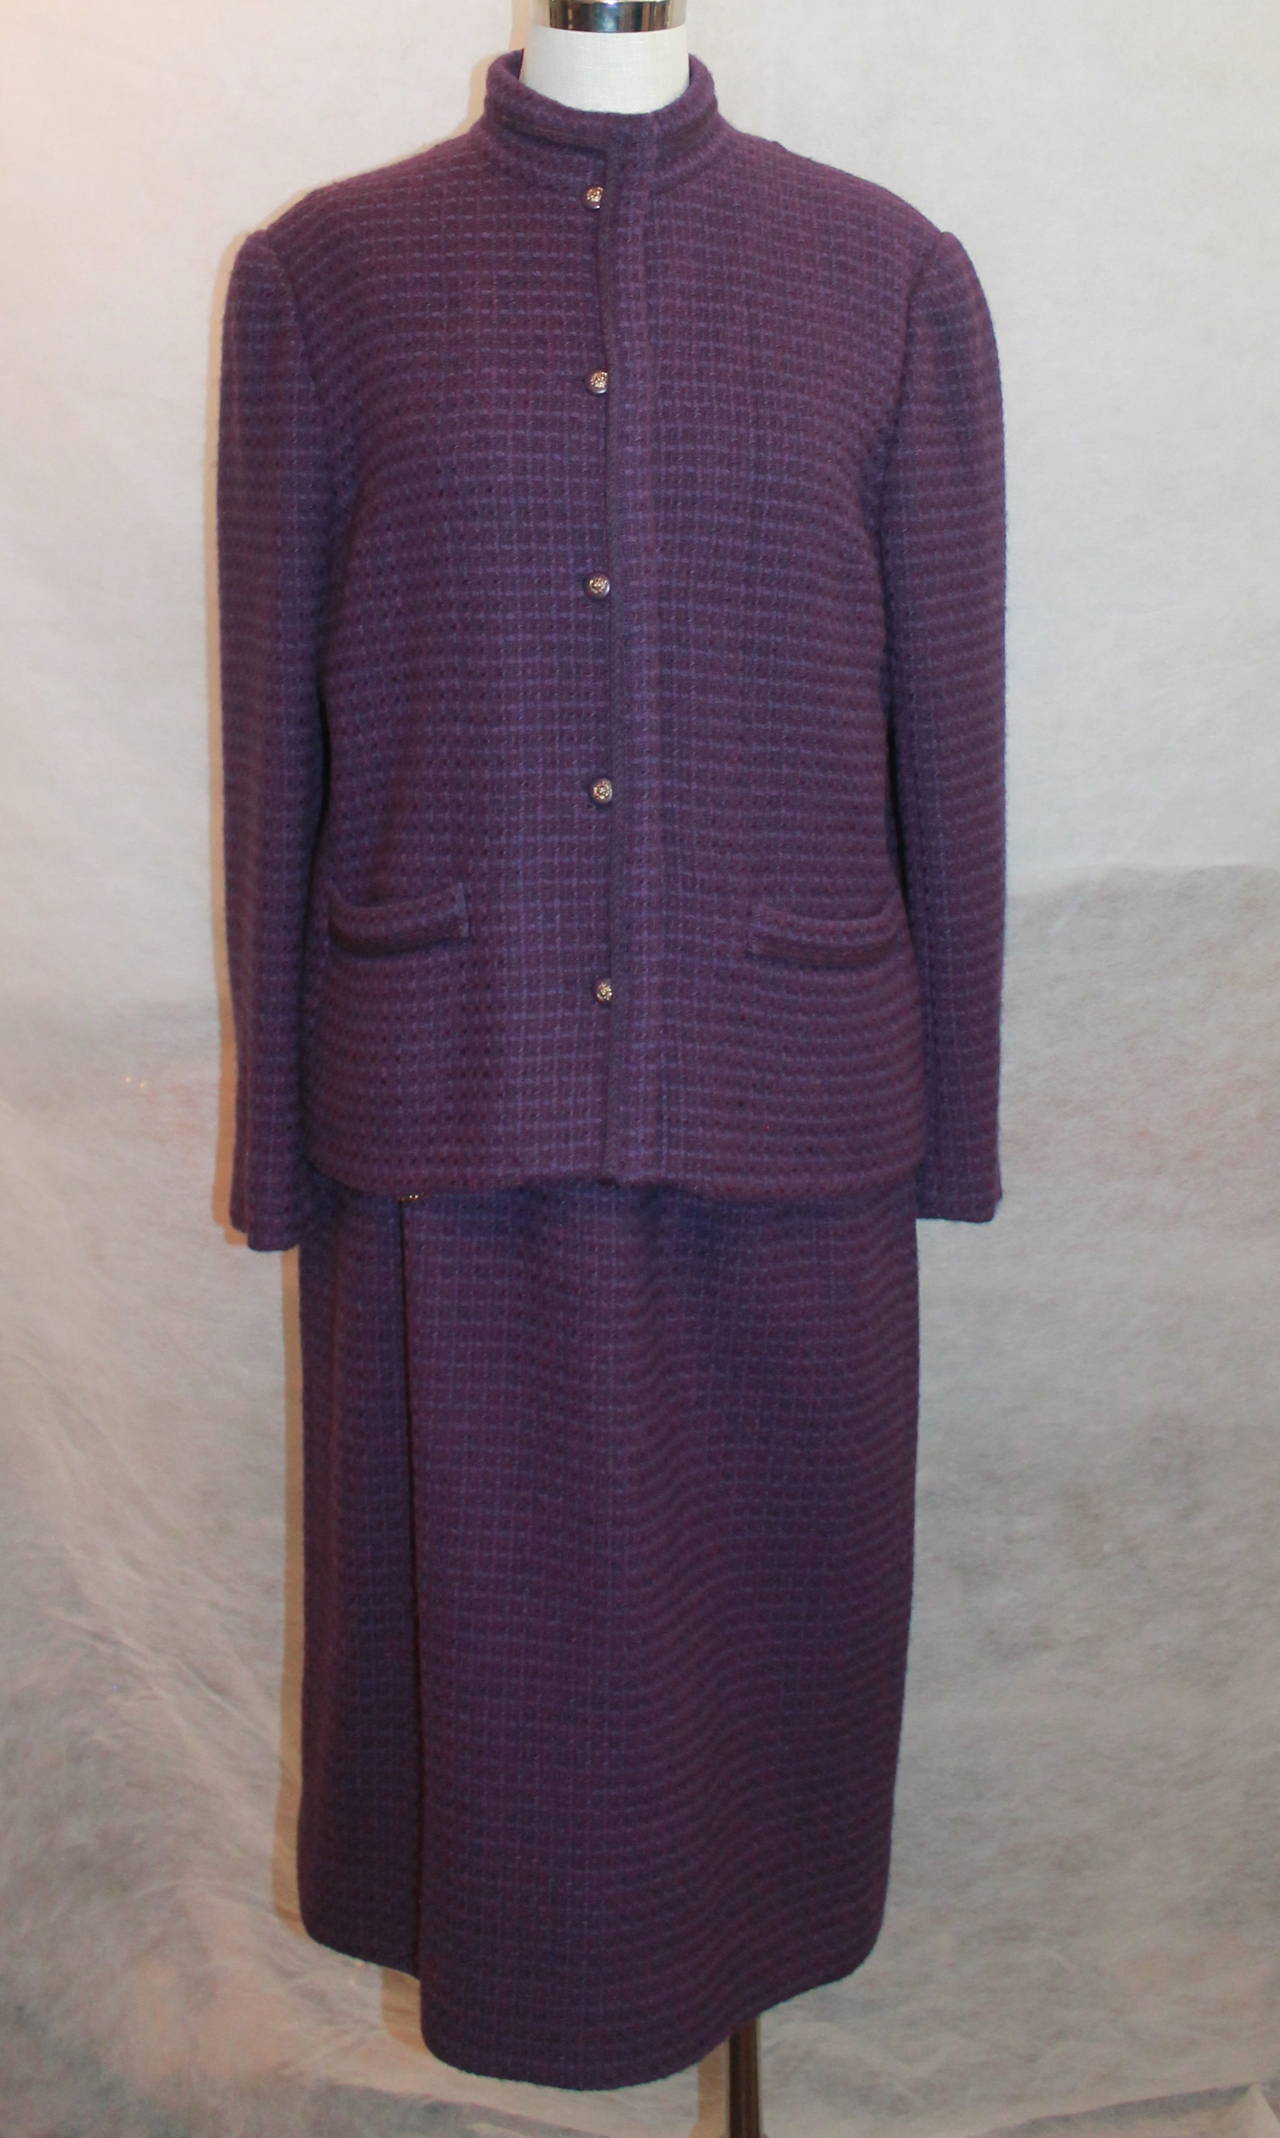 Chanel 1970's Vintage Purple Tweed Wool Skirt Suit - 44. This suit is in very good vintage condition with very minor wear. It has 2 front pockets and has an elevated purple trimming. The buttons have the lion emblem on them as well.